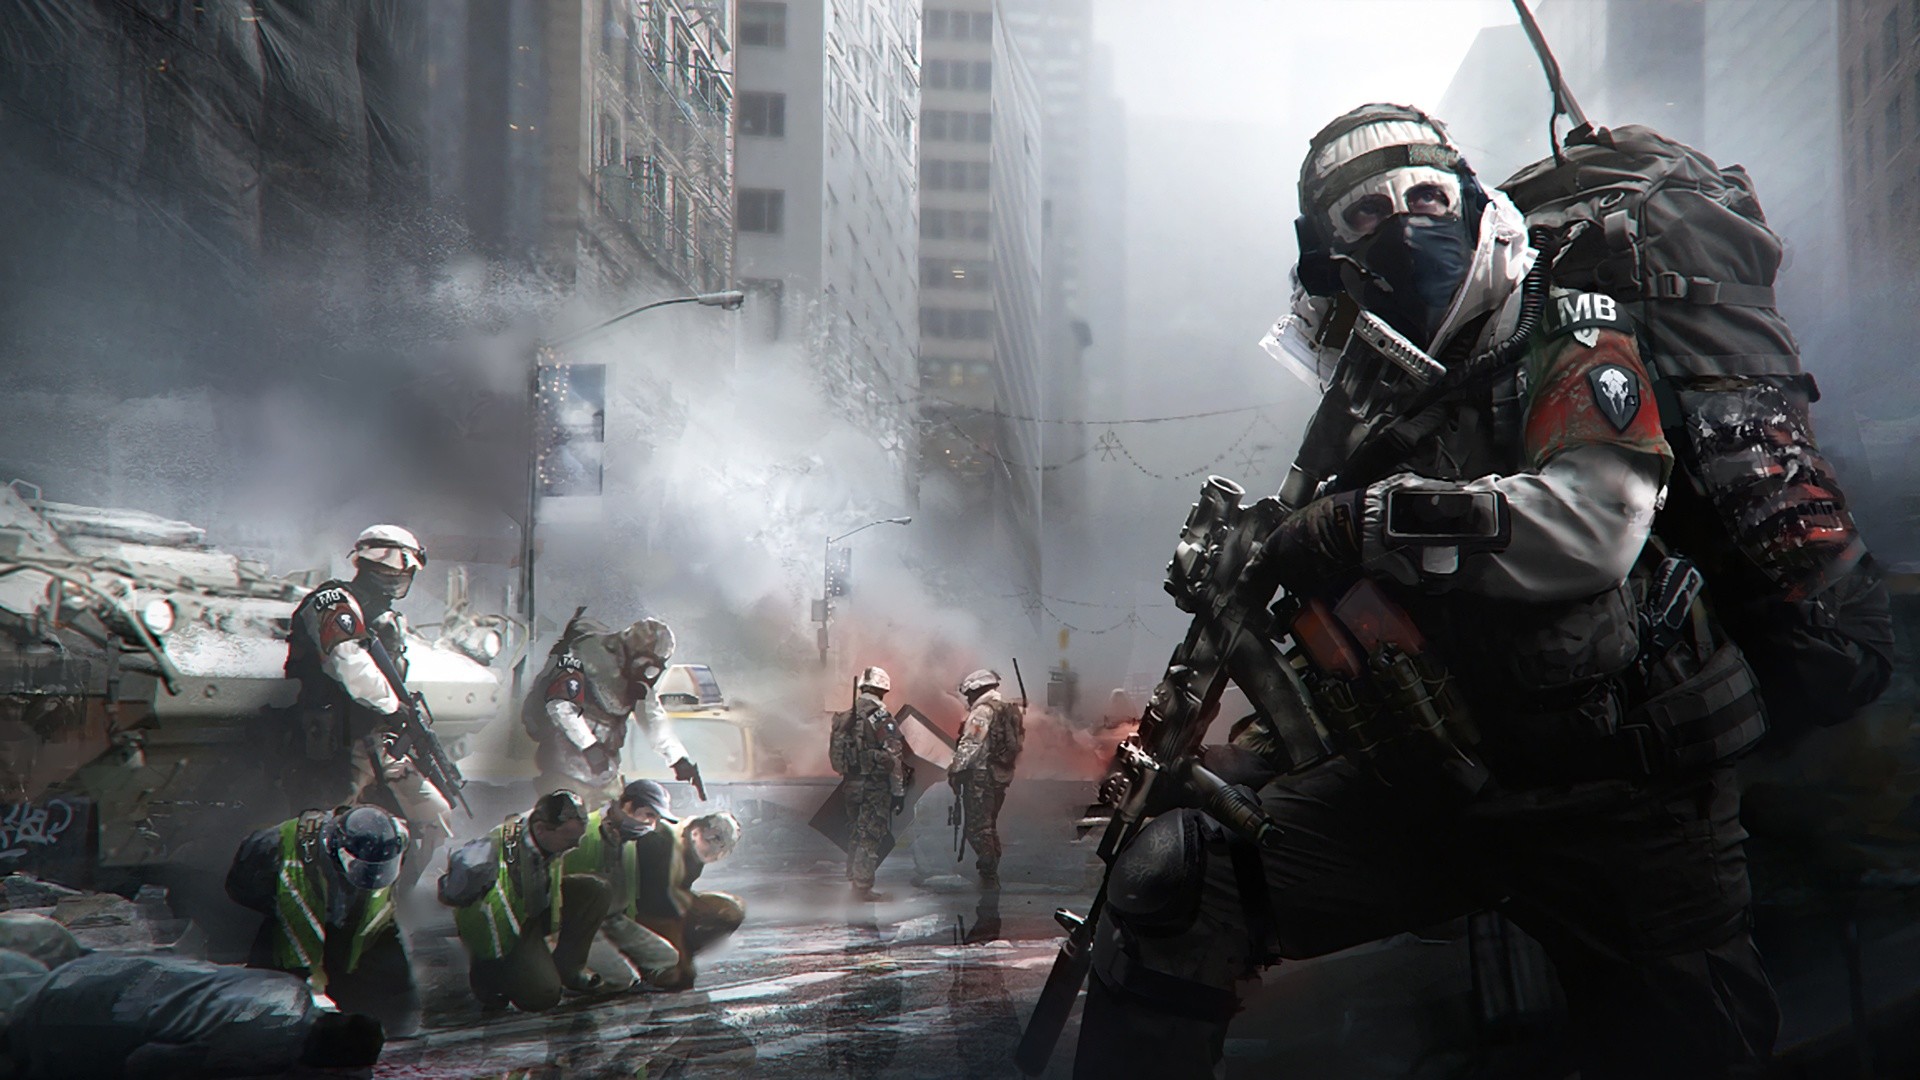 1920x1080 Tom Clancy's The Division HD Wallpaper | Hintergrund |  |  ID:720696 - Wallpaper Abyss